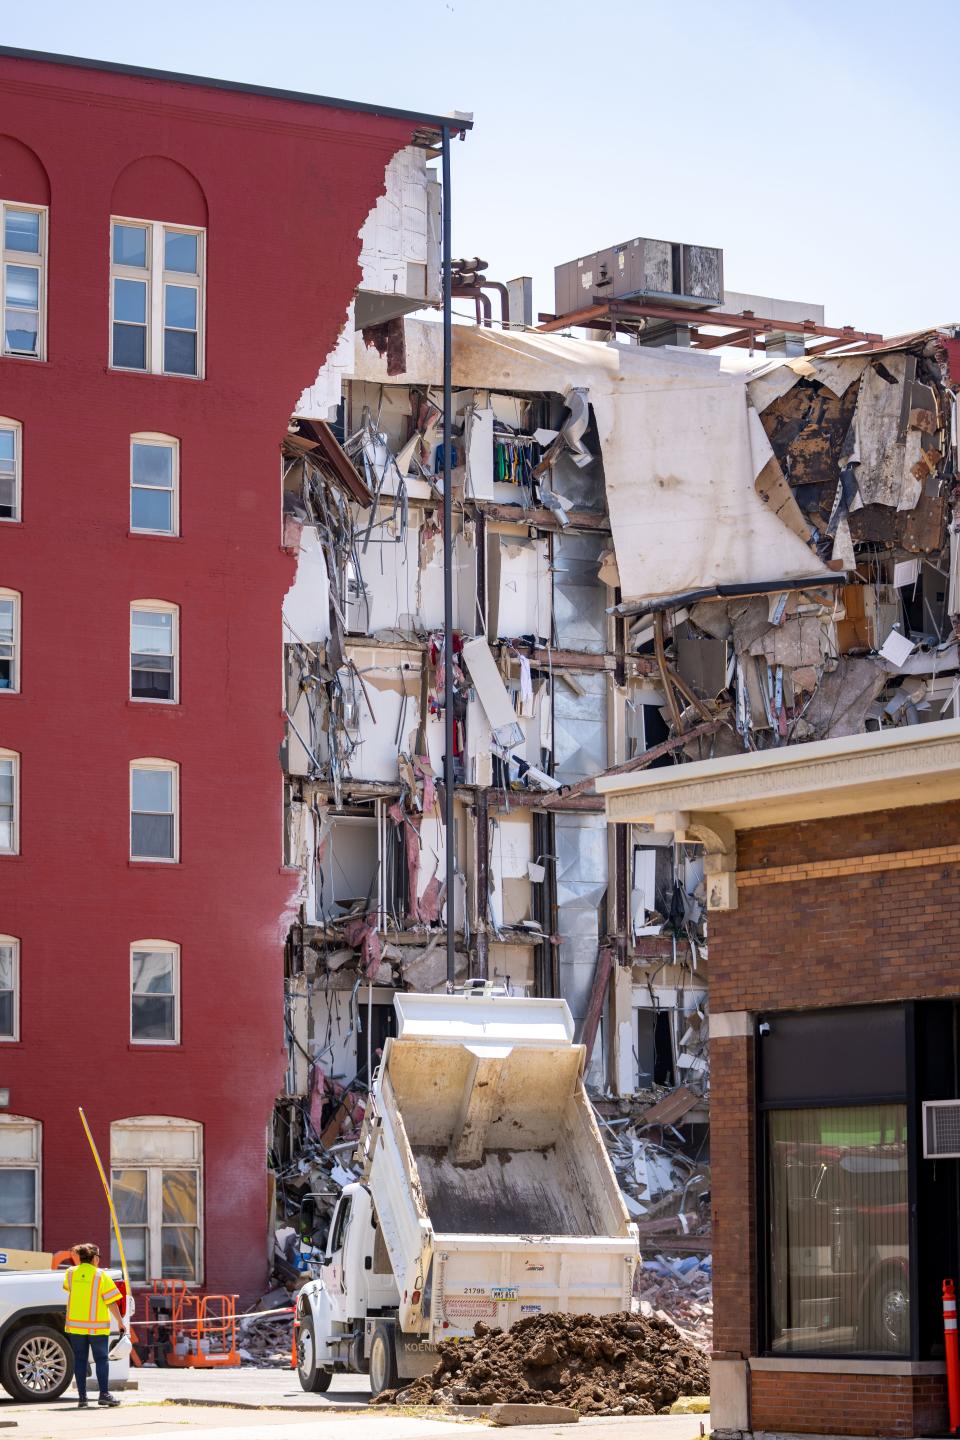 Workers secure the area on Monday, May 29, 2023, a day after an apartment building partially collapsed in Davenport.